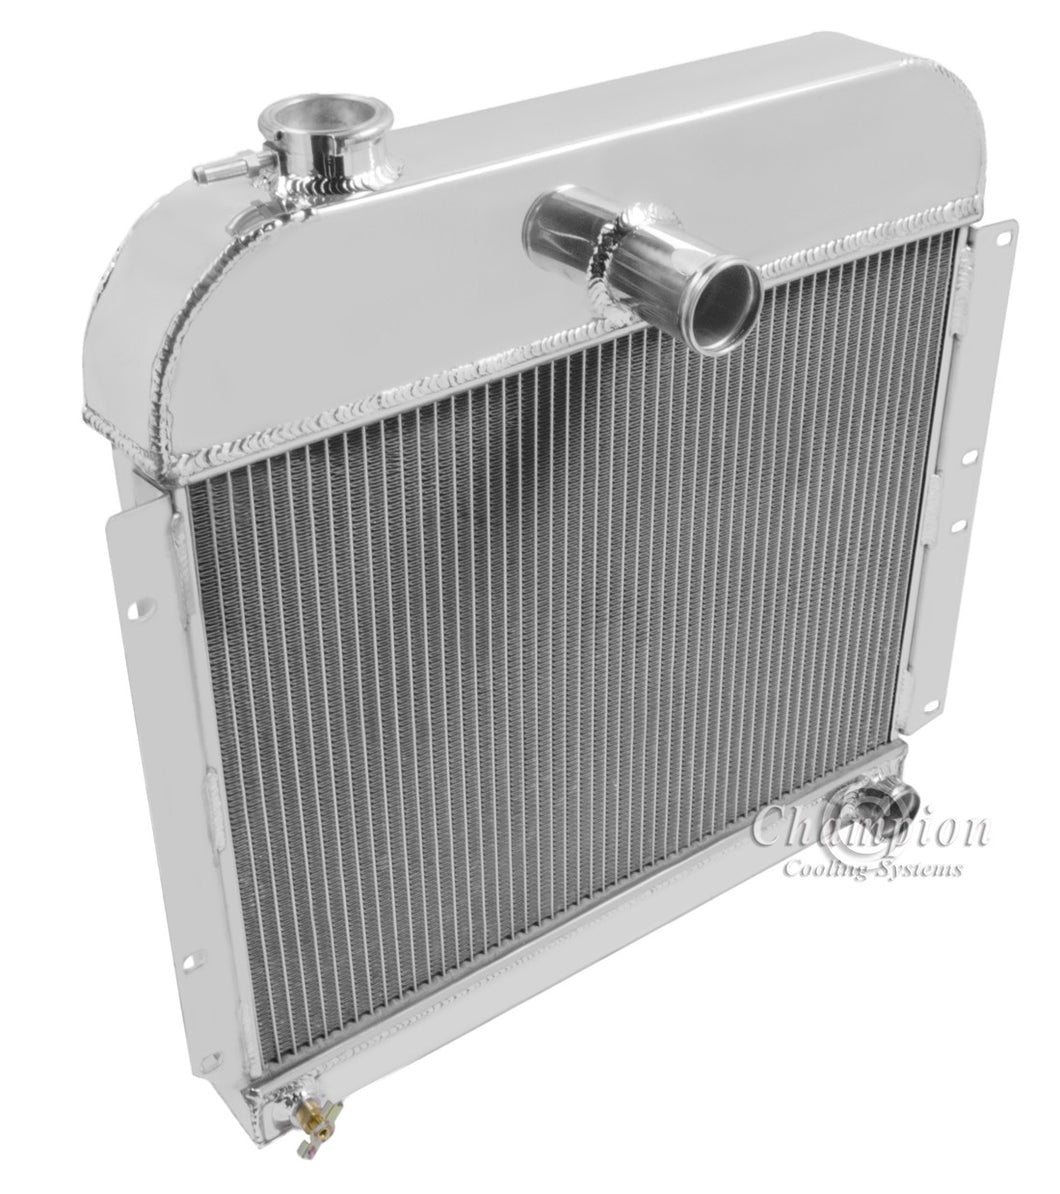 1946 PLYMOUTH P15 DELUXE 3.6 L RADIATOR AE4152